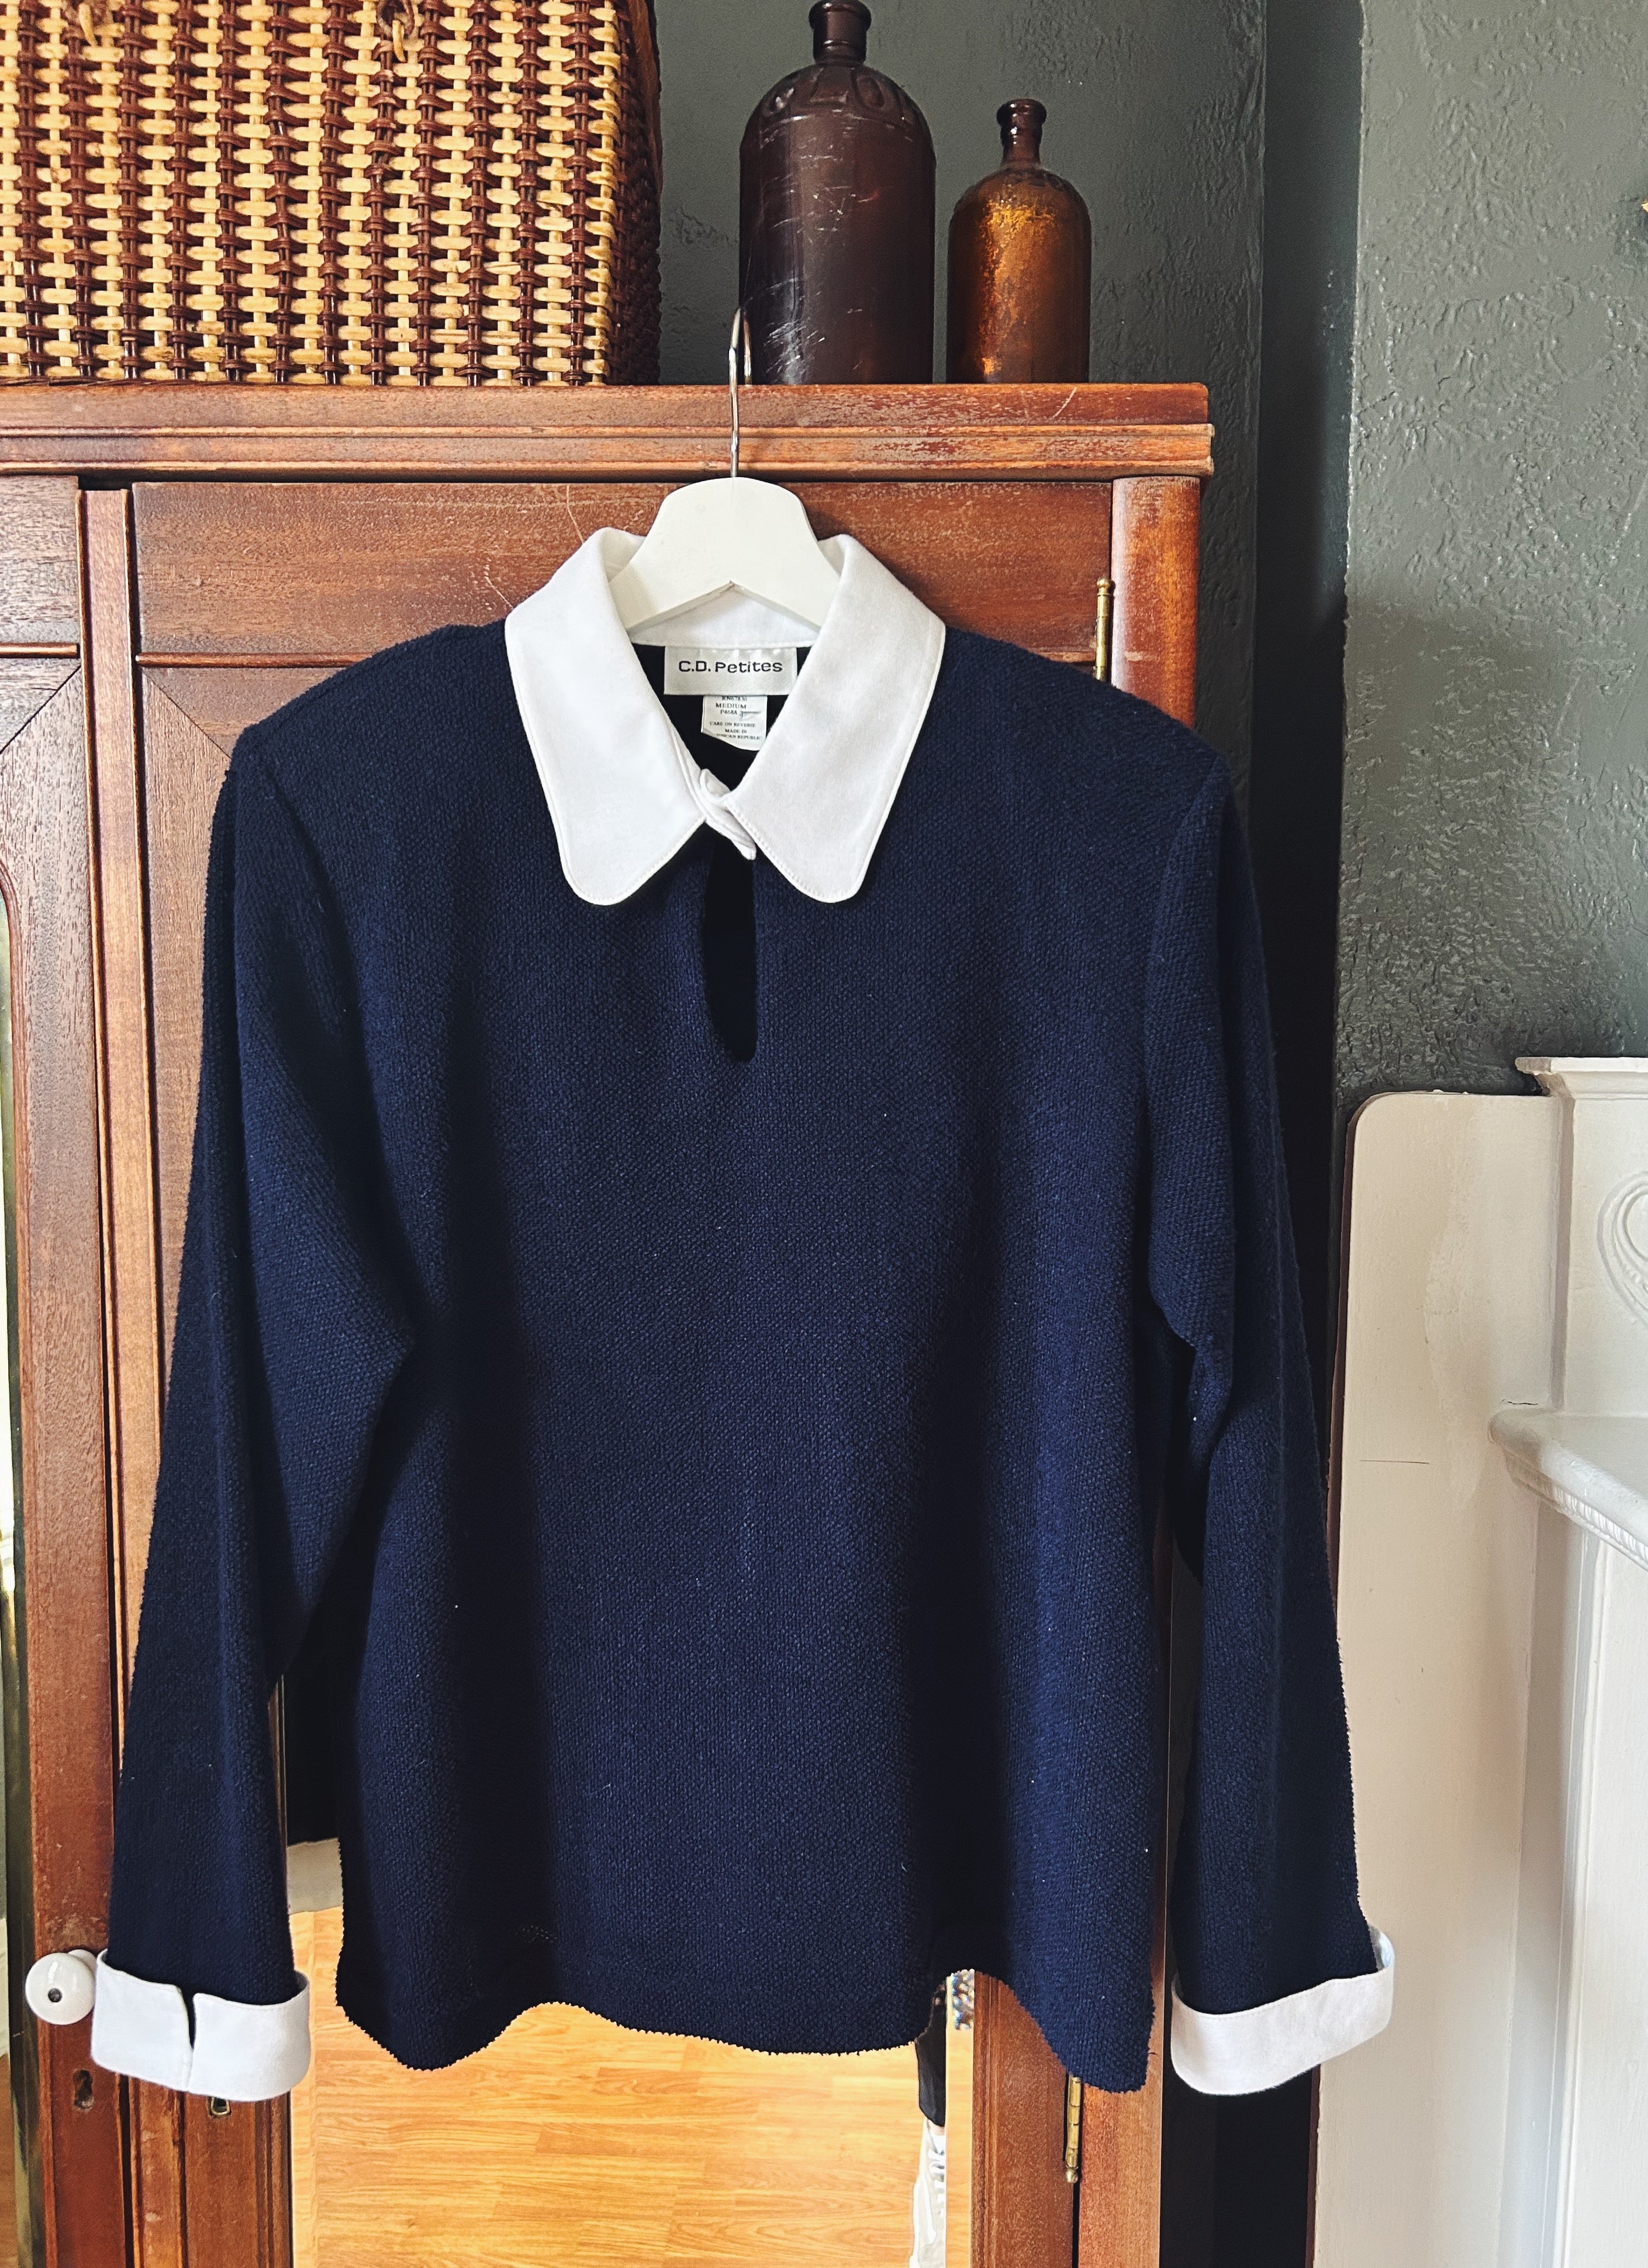 Navy Sweater with Statement Collar and Cuffs